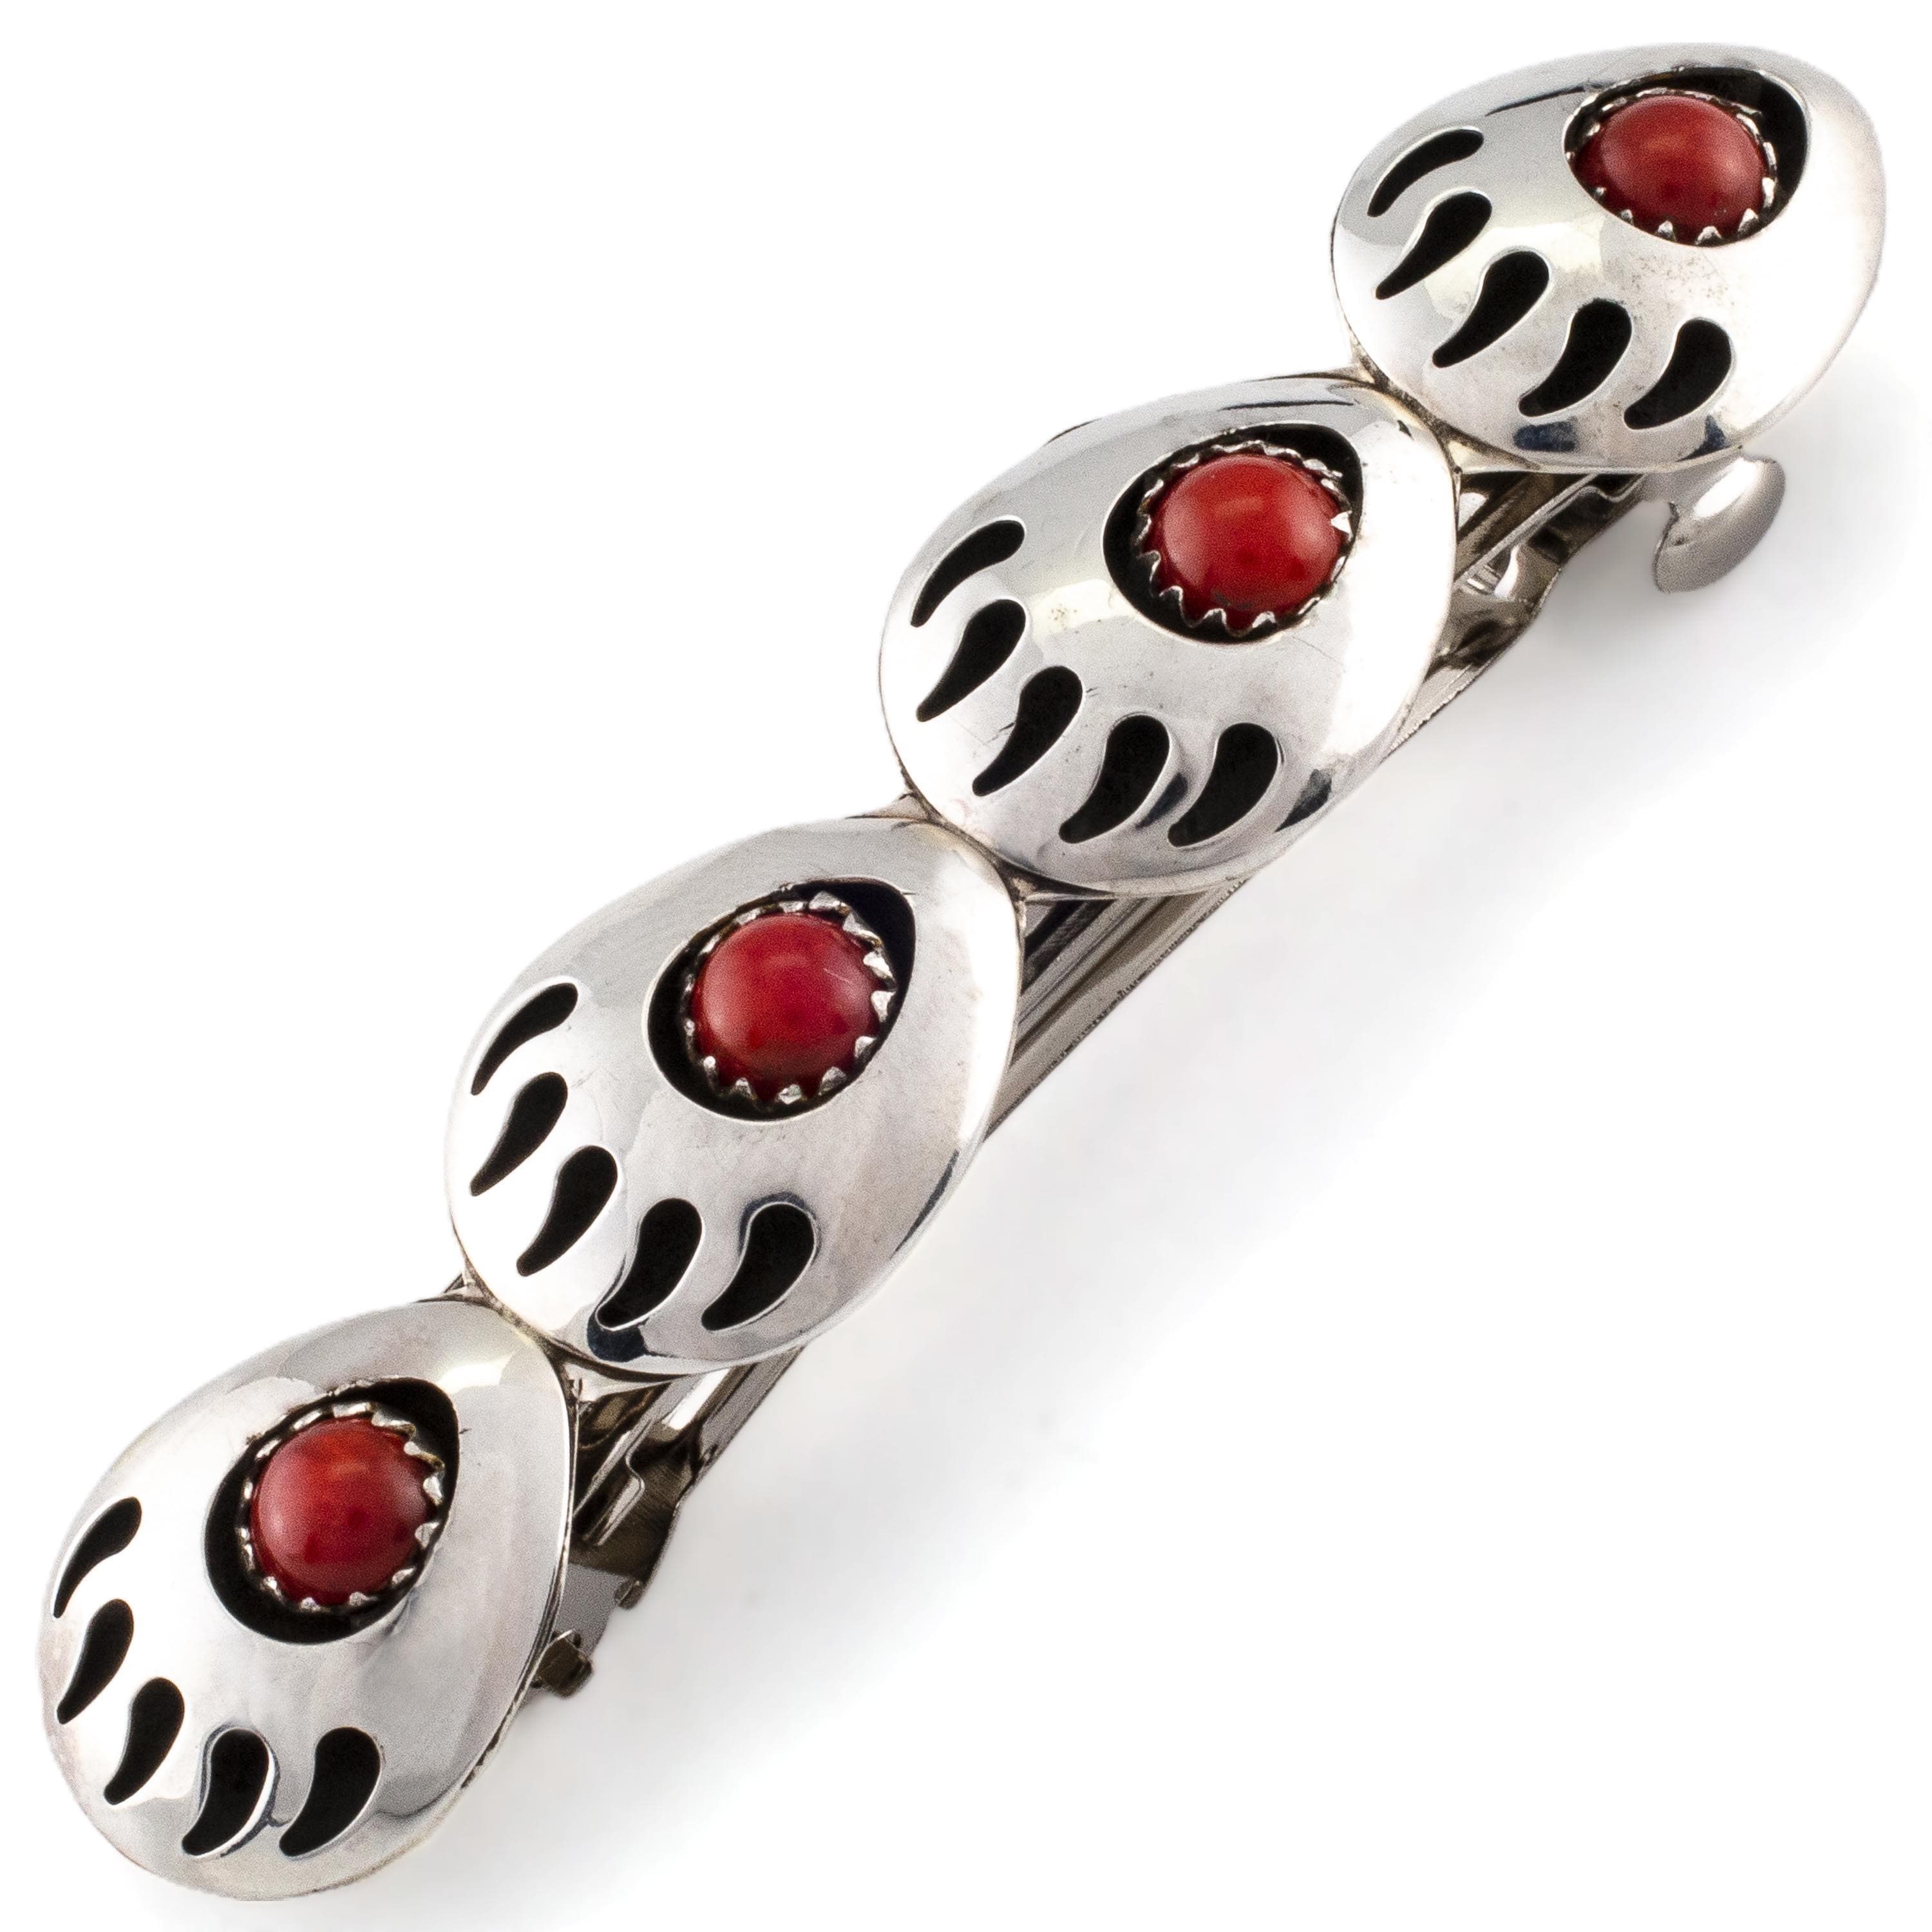 Kalifano Native American Jewelry Virginia Long Quadruple Bear Paw with Coral Inlay USA Native American Made 925 Sterling Silver Hair Barrette NAH160.002